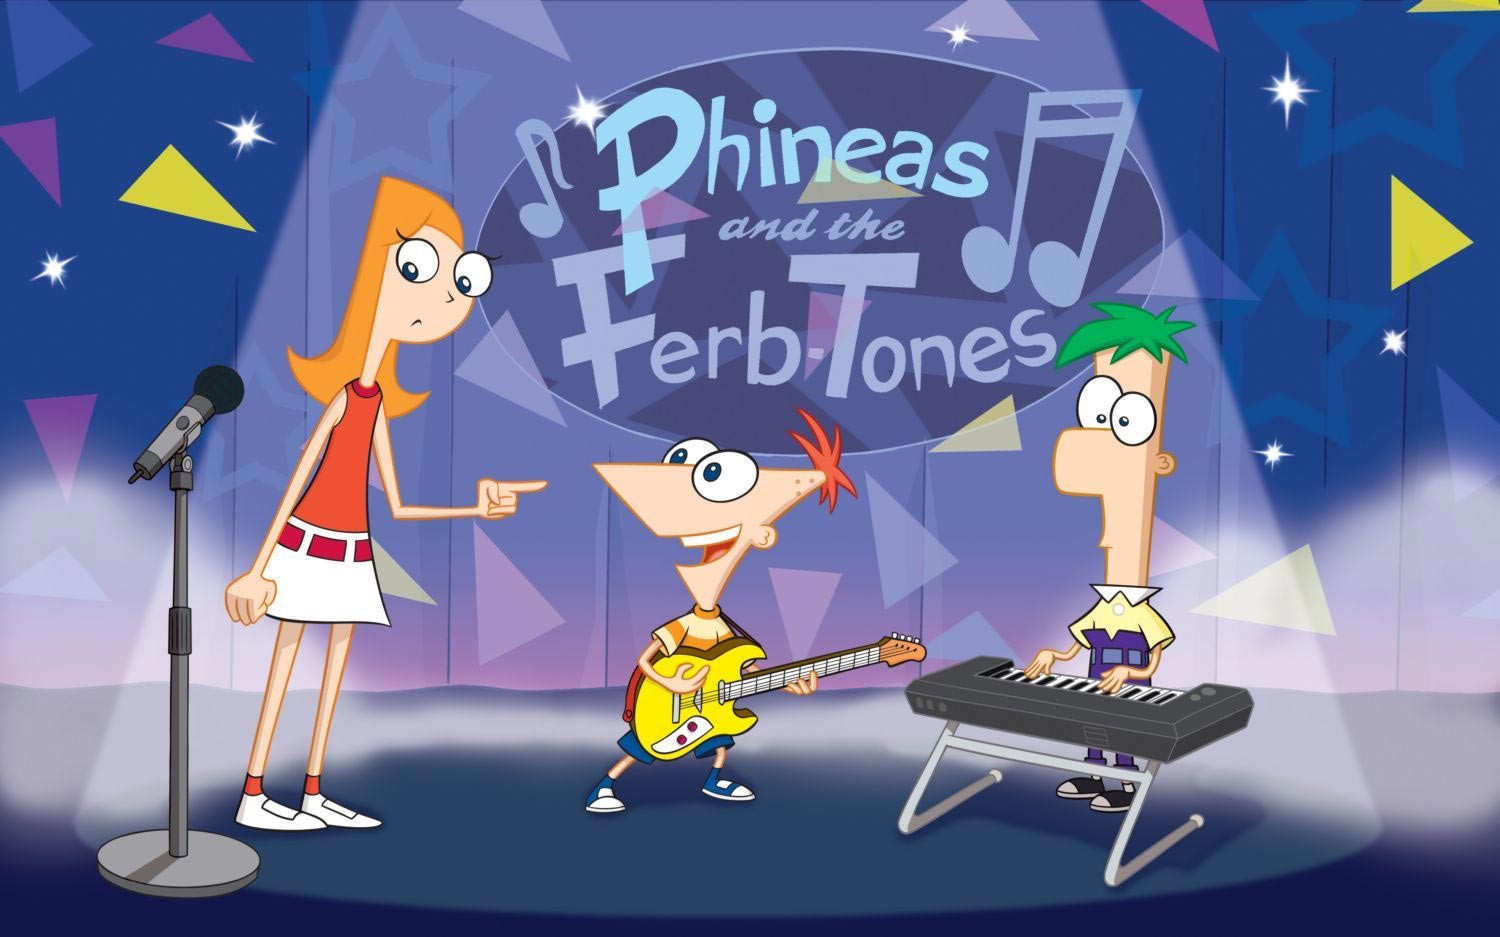 HD Phineas and Ferb Disney Animation Wallpaper for Desktop Full ...